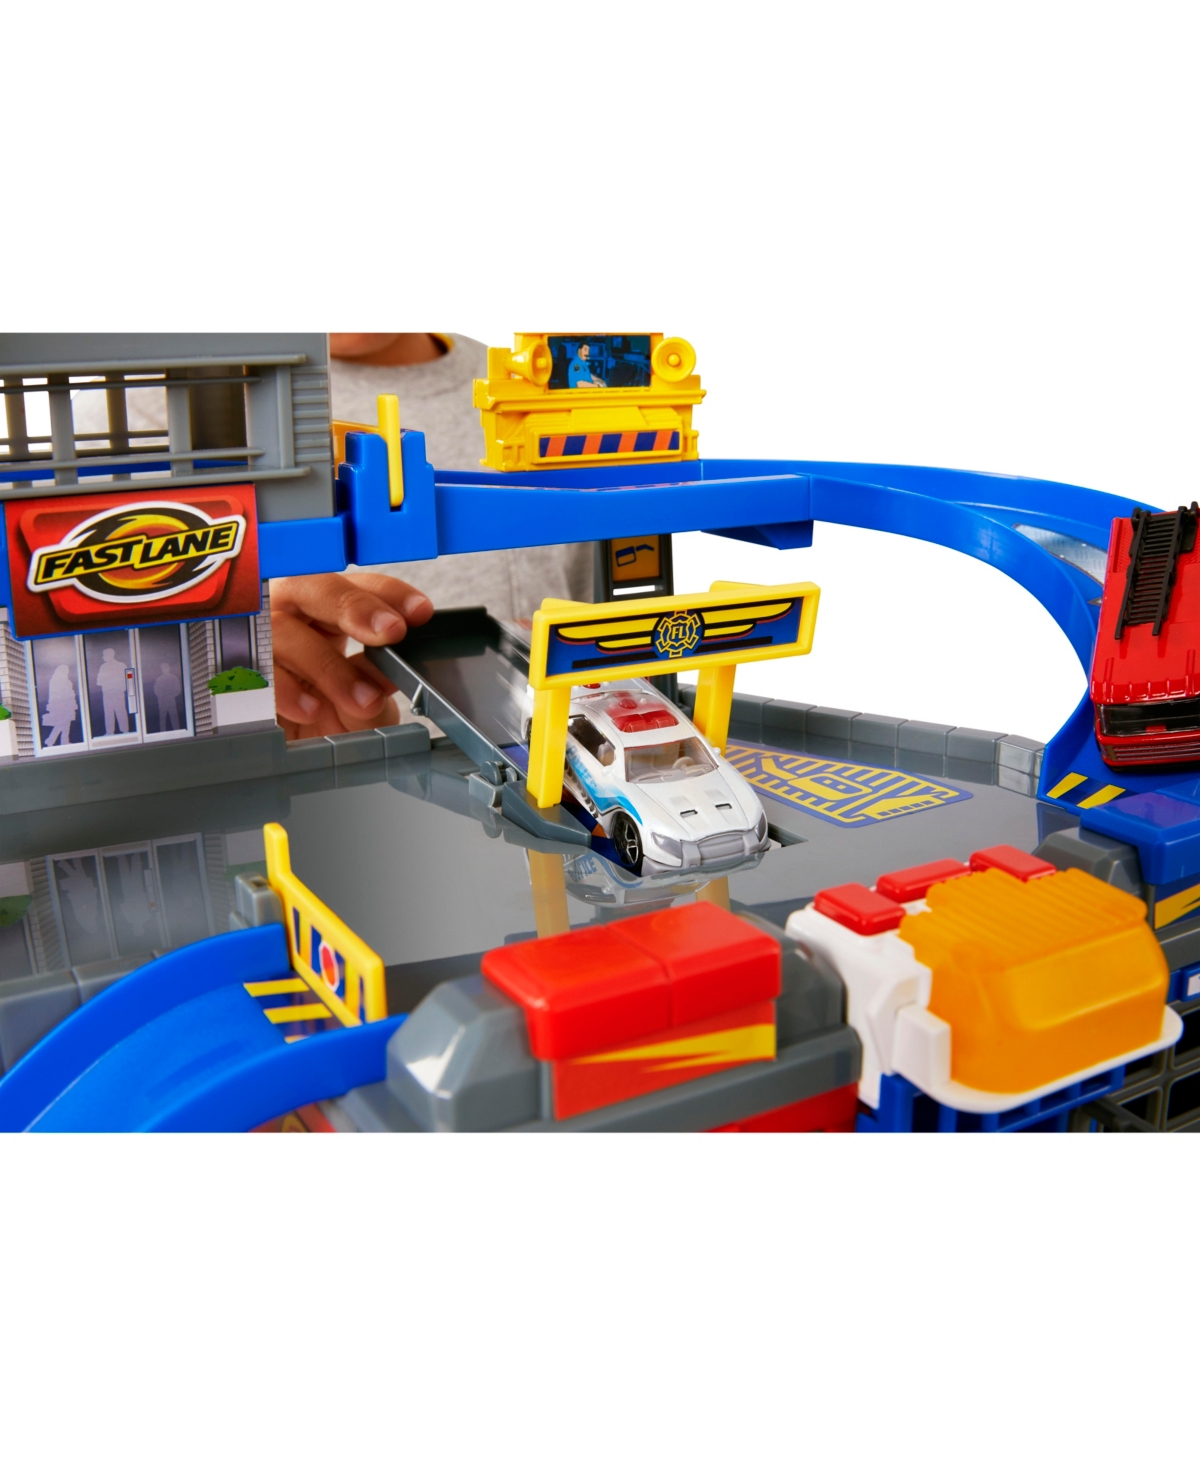 Rescue Station Set, Created for You by Toys R Us